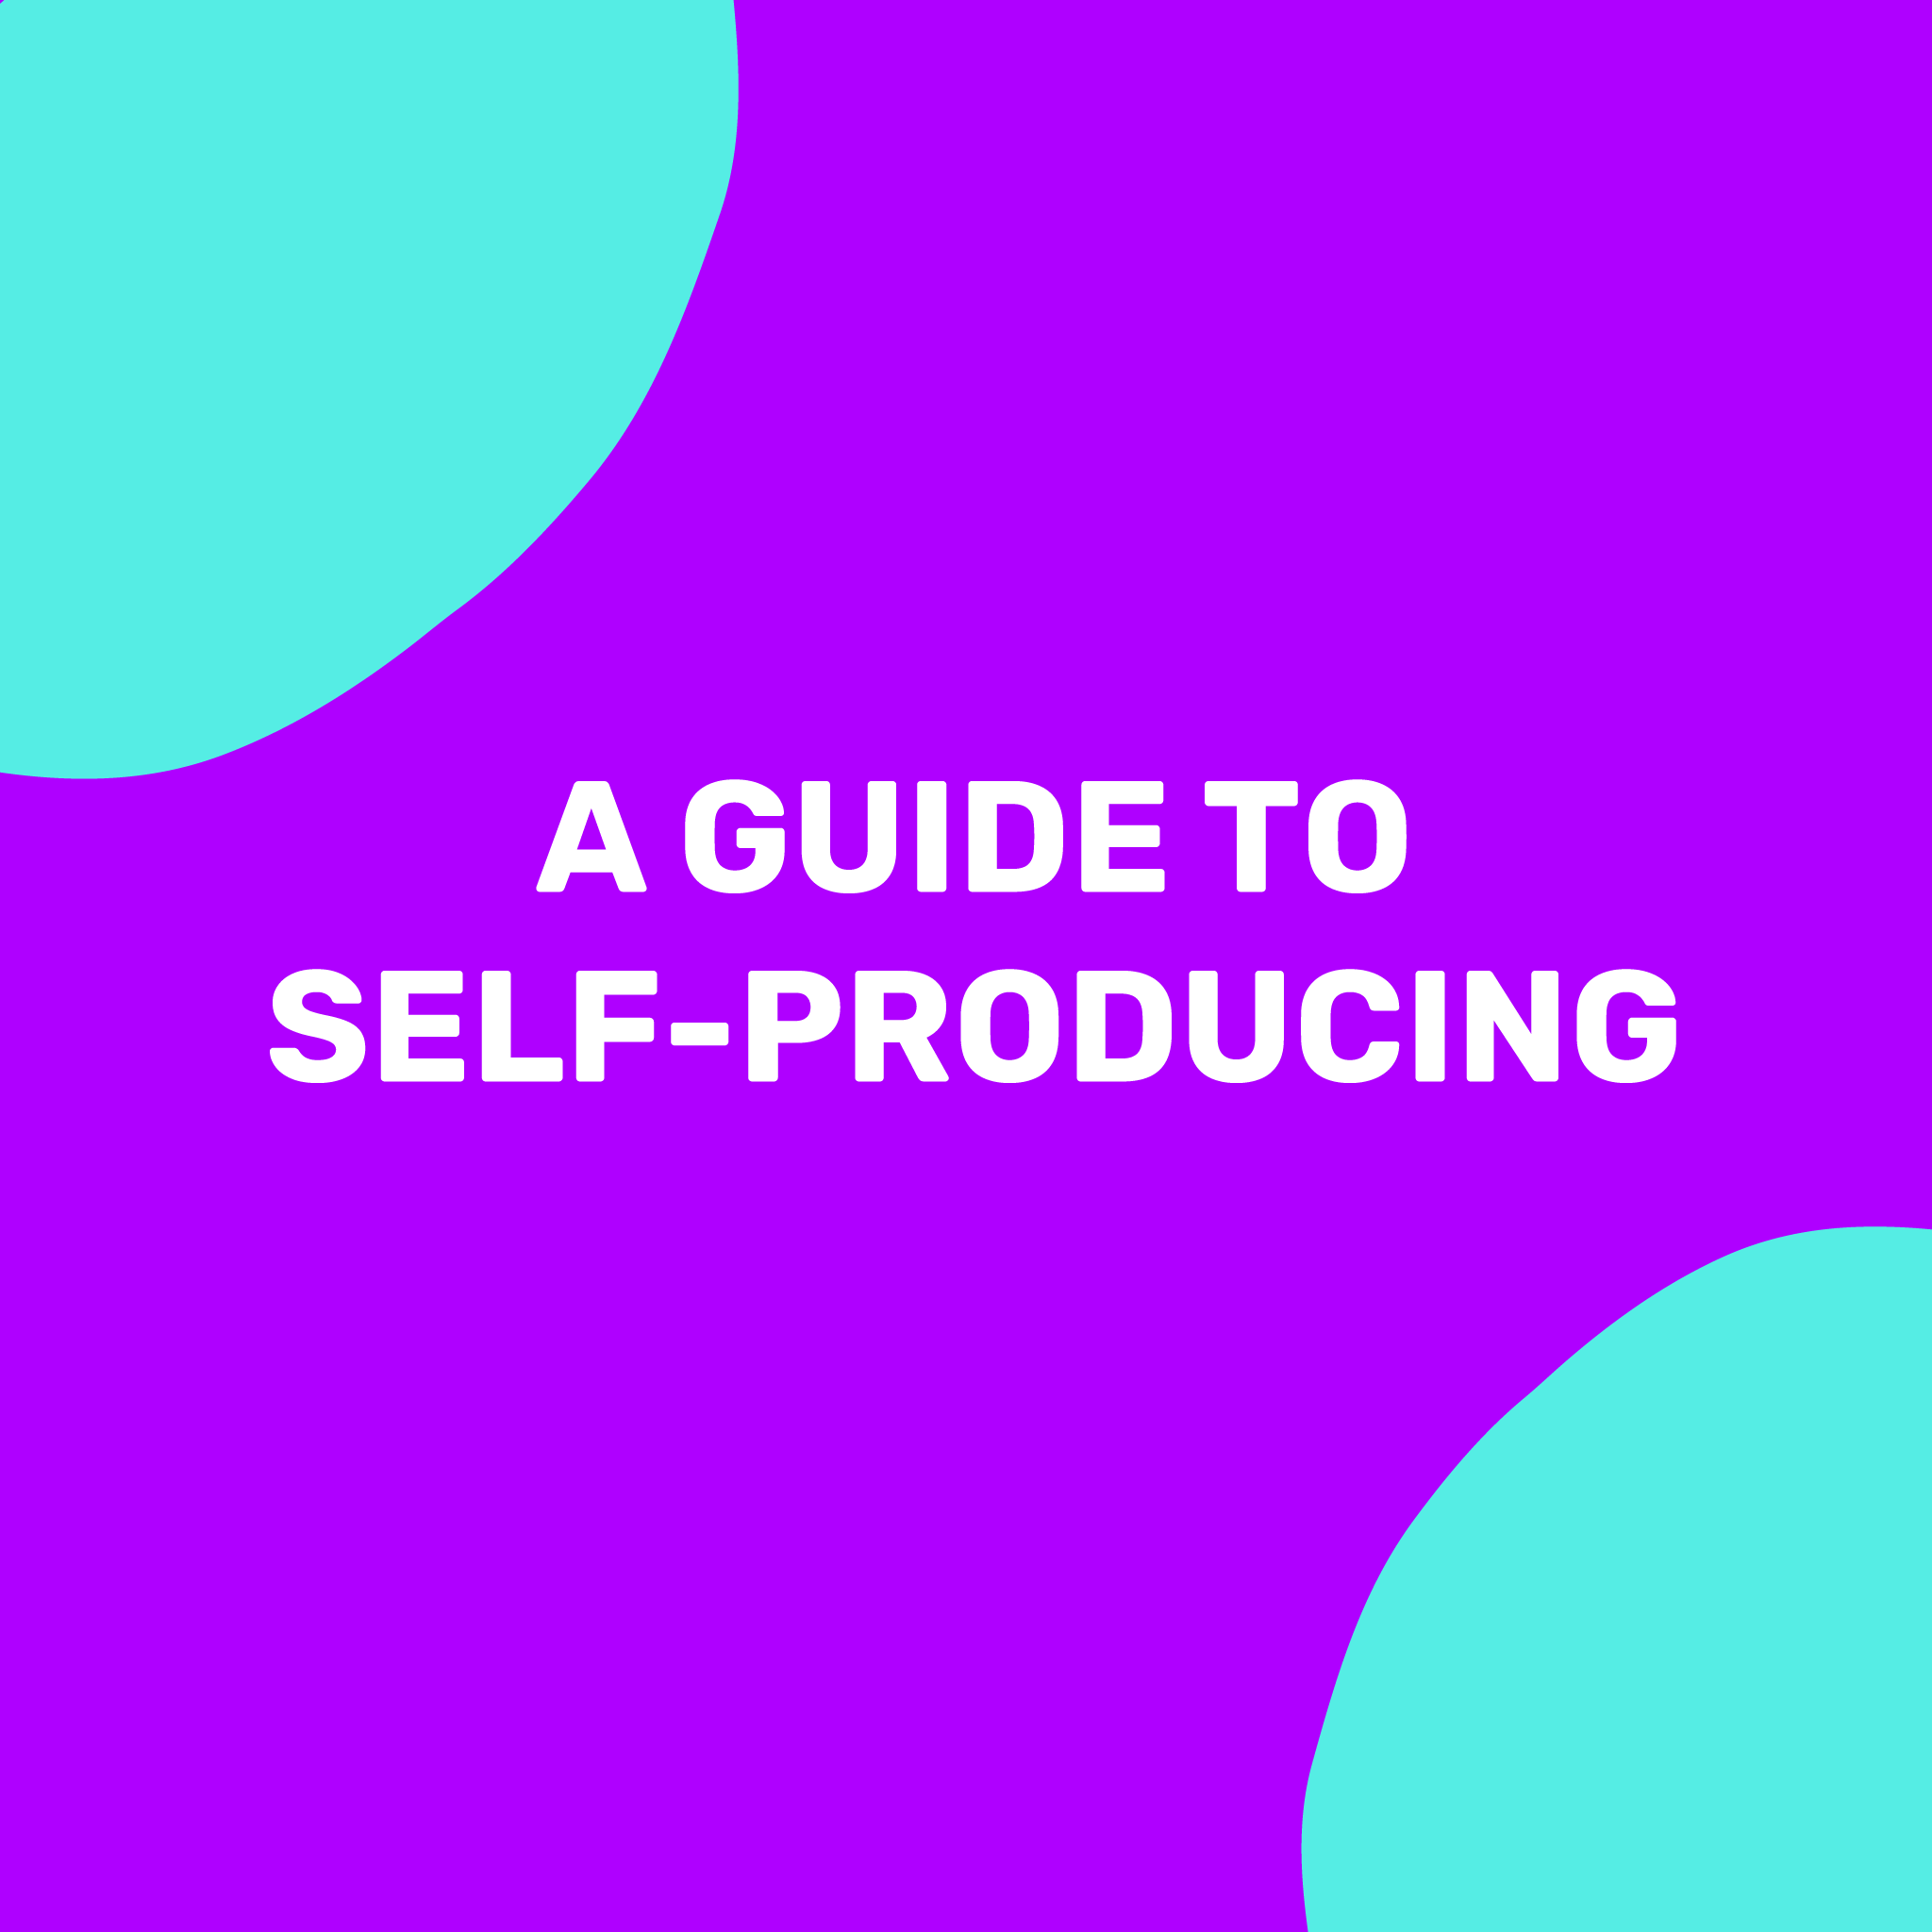 A guide to self-producing